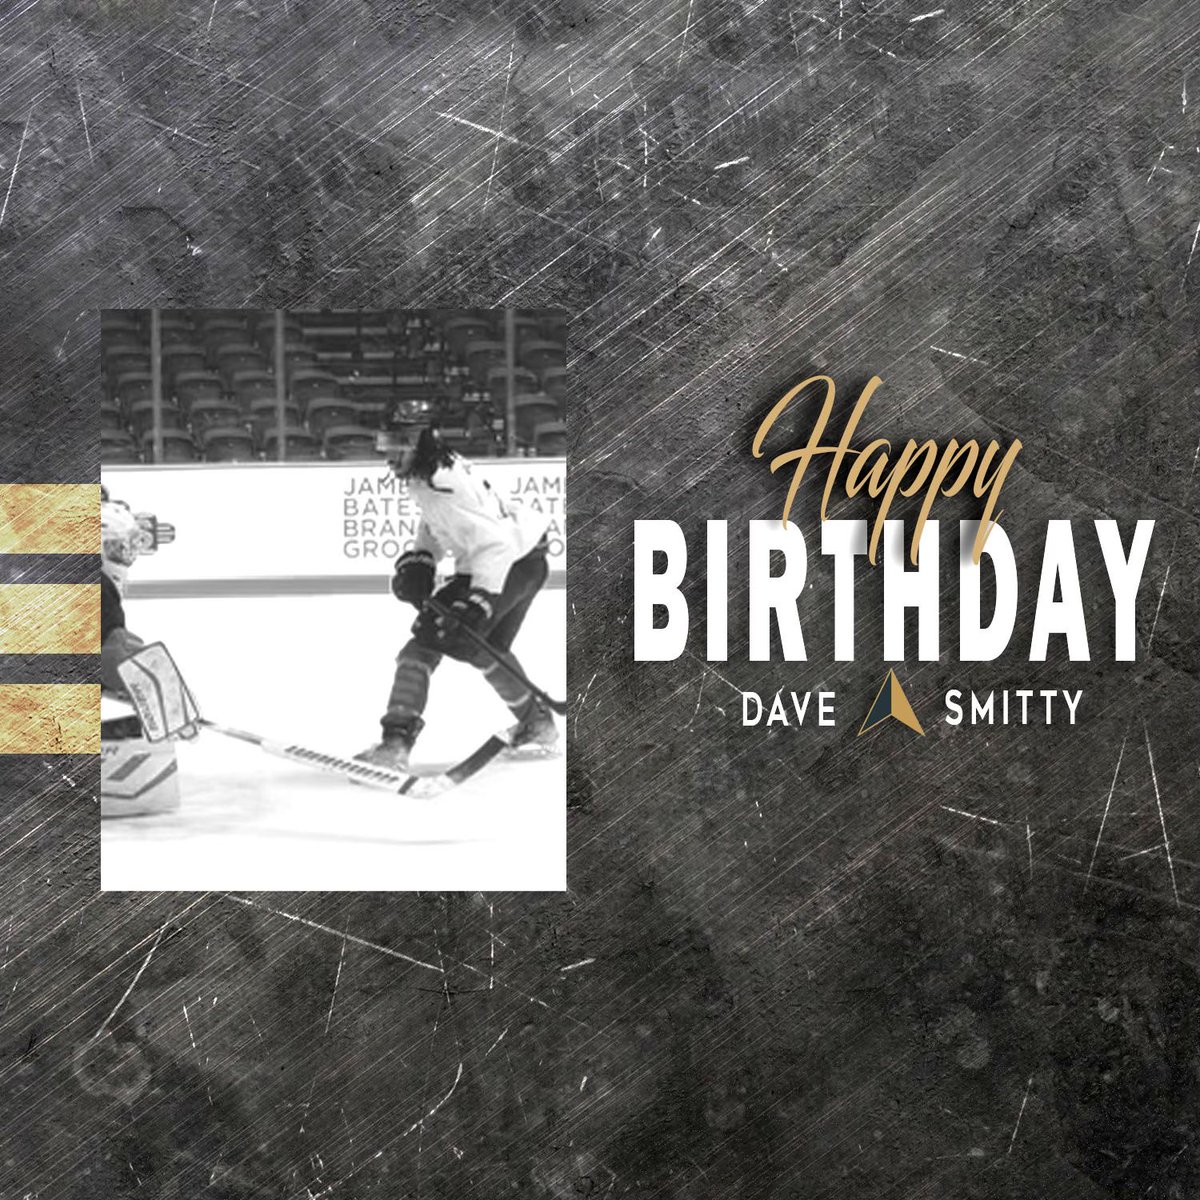 Happy birthday to @21dsmitty. A mentor, a coach, and a true inspiration to all. Your dedication to your athletes is unmatched, and we can’t wait to see what amazing things lie ahead. Can’t thank you enough 💪🤙 @extraattackerhockey_  #happybirthday #mentor #changethenarrative